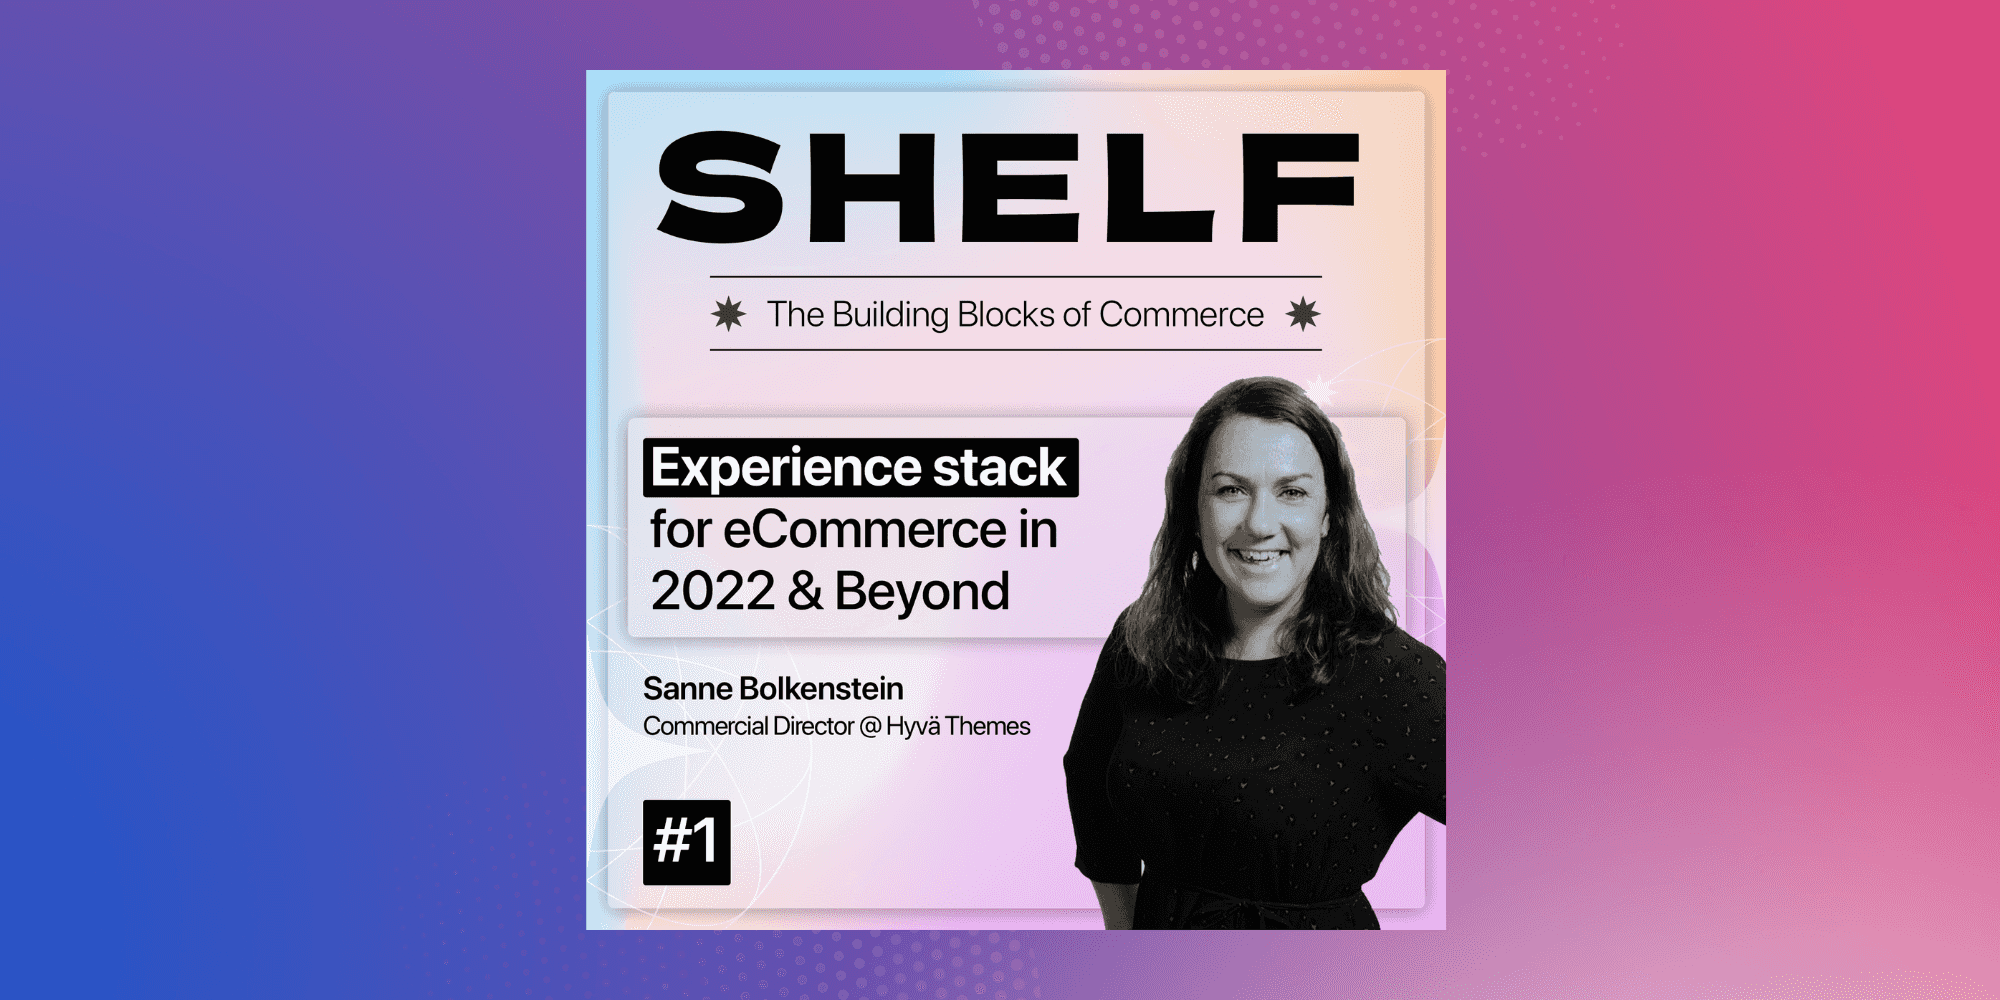 shelf-experience-stack-for-ecommerce-in-2023-beyond